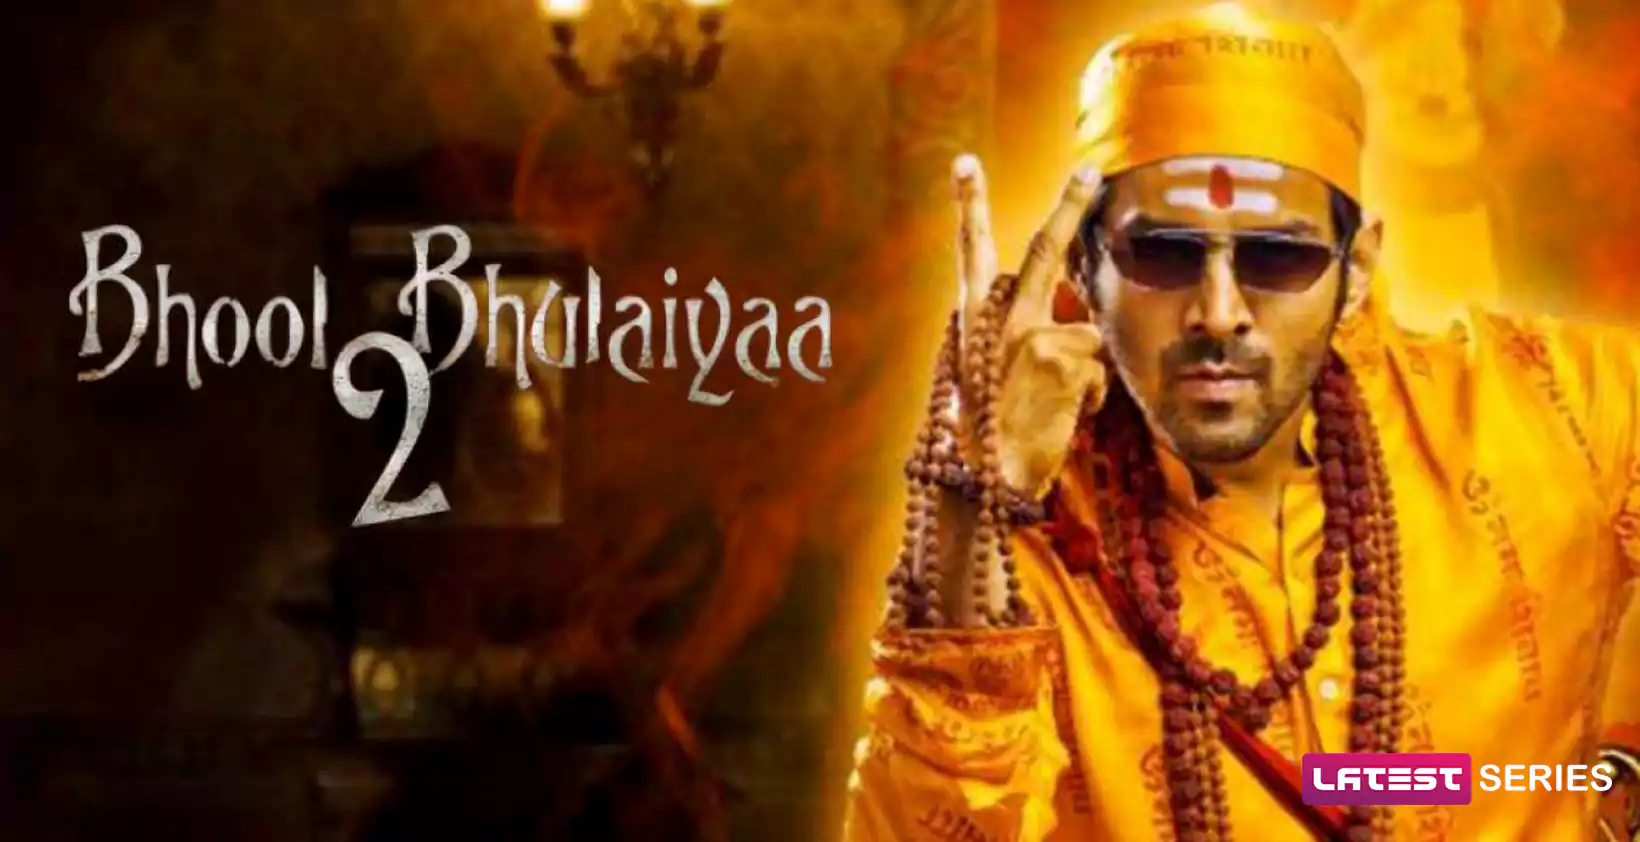 Bhool Bhulaiyaa 2 Release Date, Plot, Cast, Trailer, and Everything Else